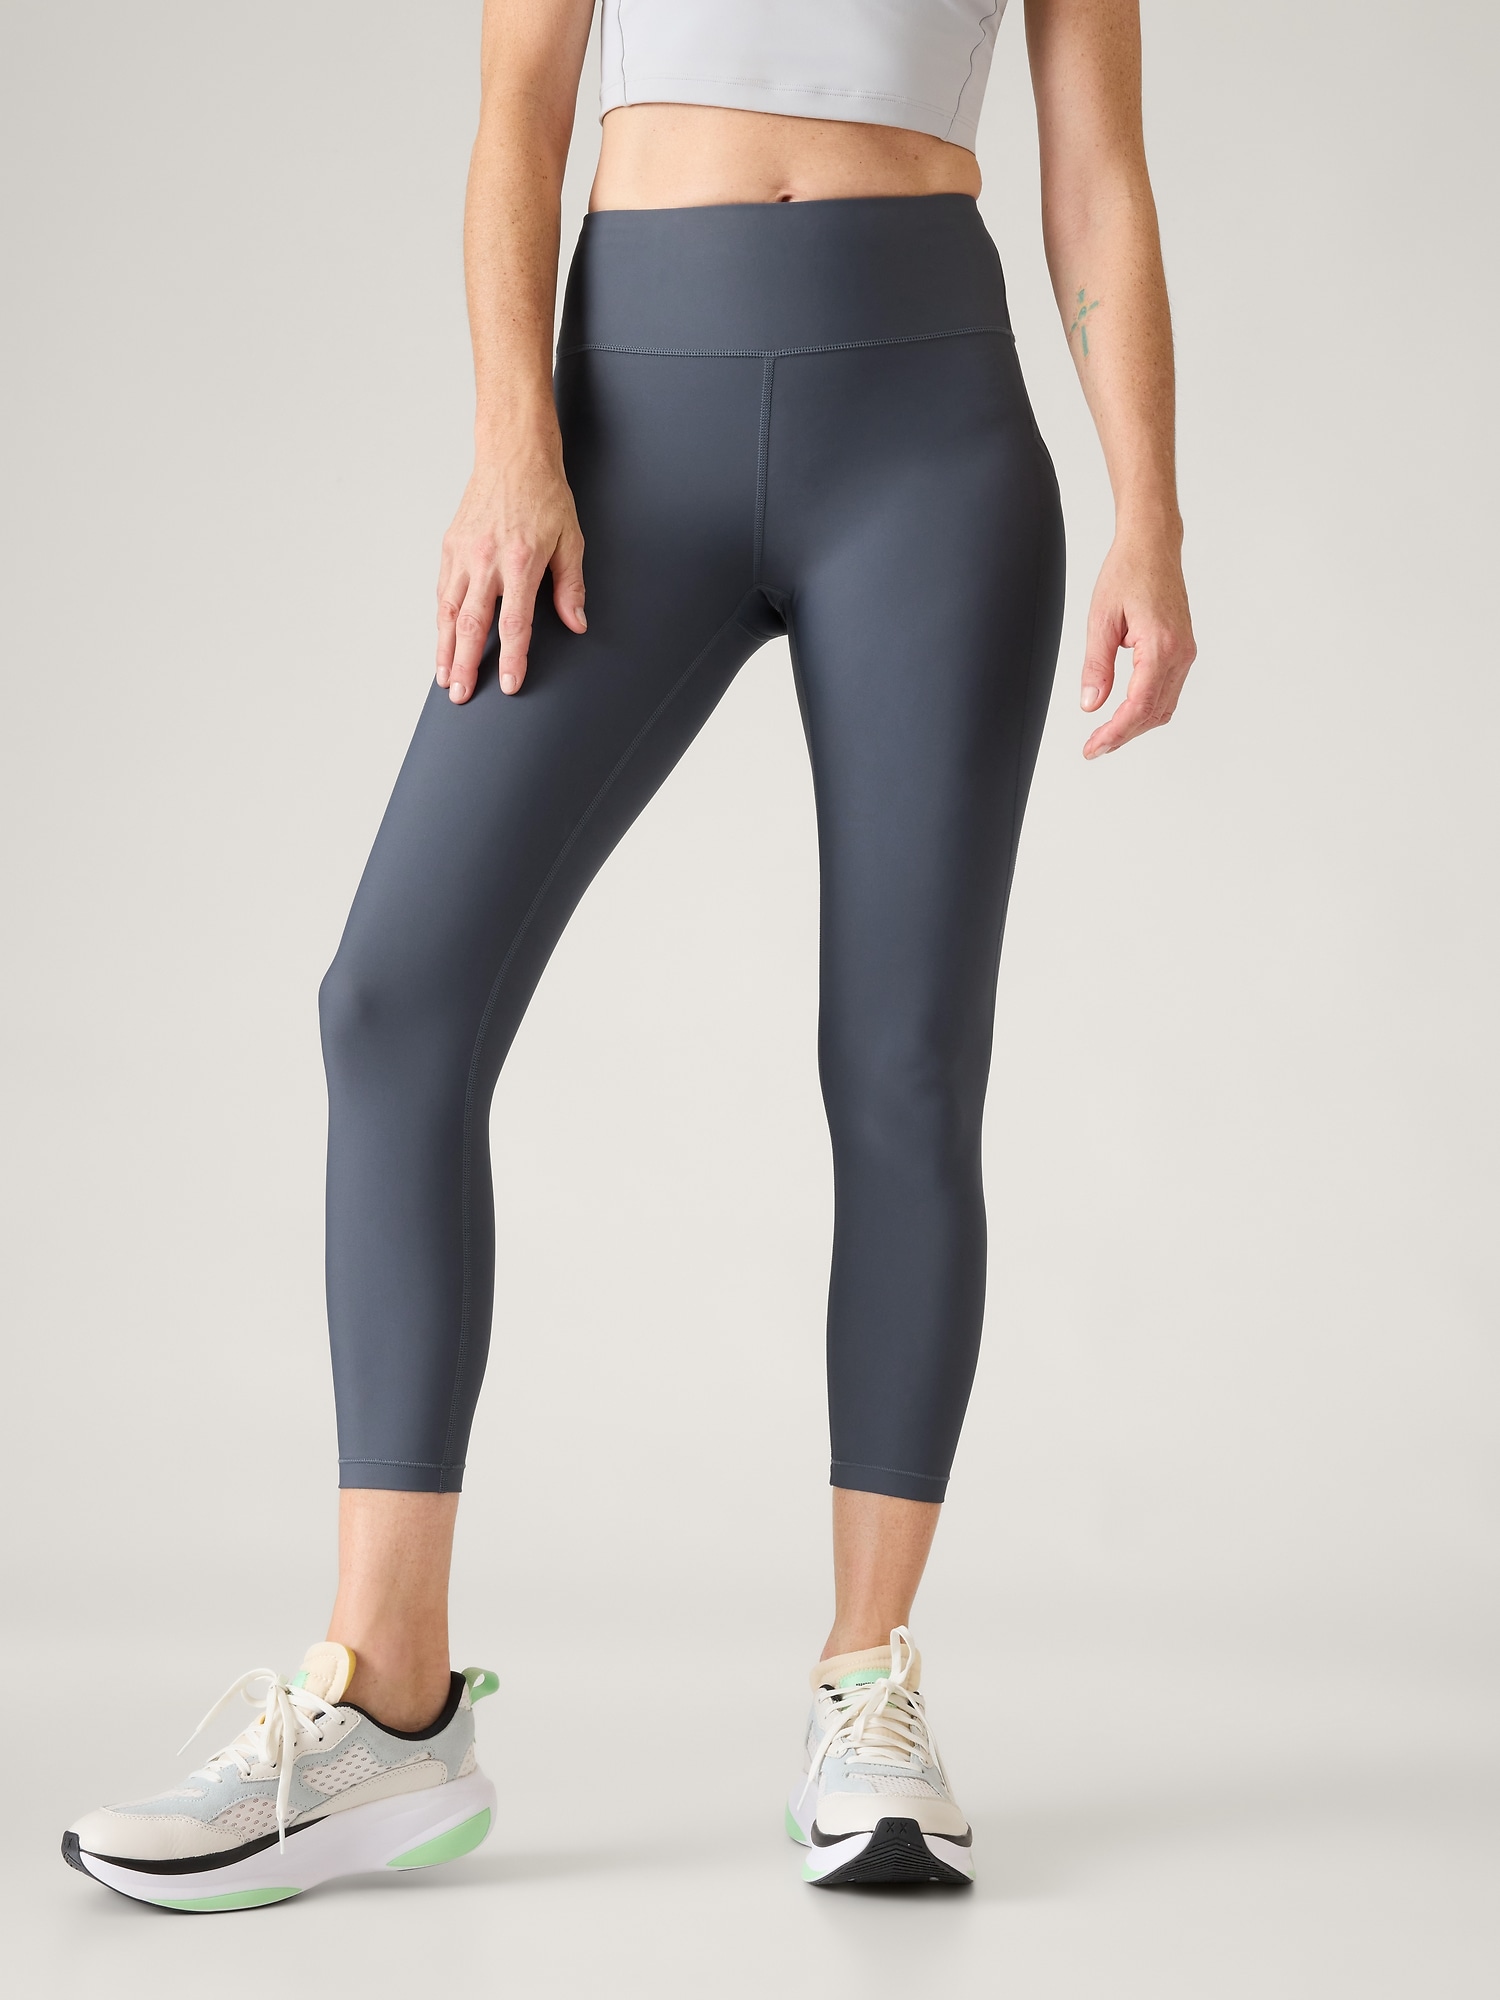 sell] [us/can] NWT dance studio pants size 8 graphite grey and